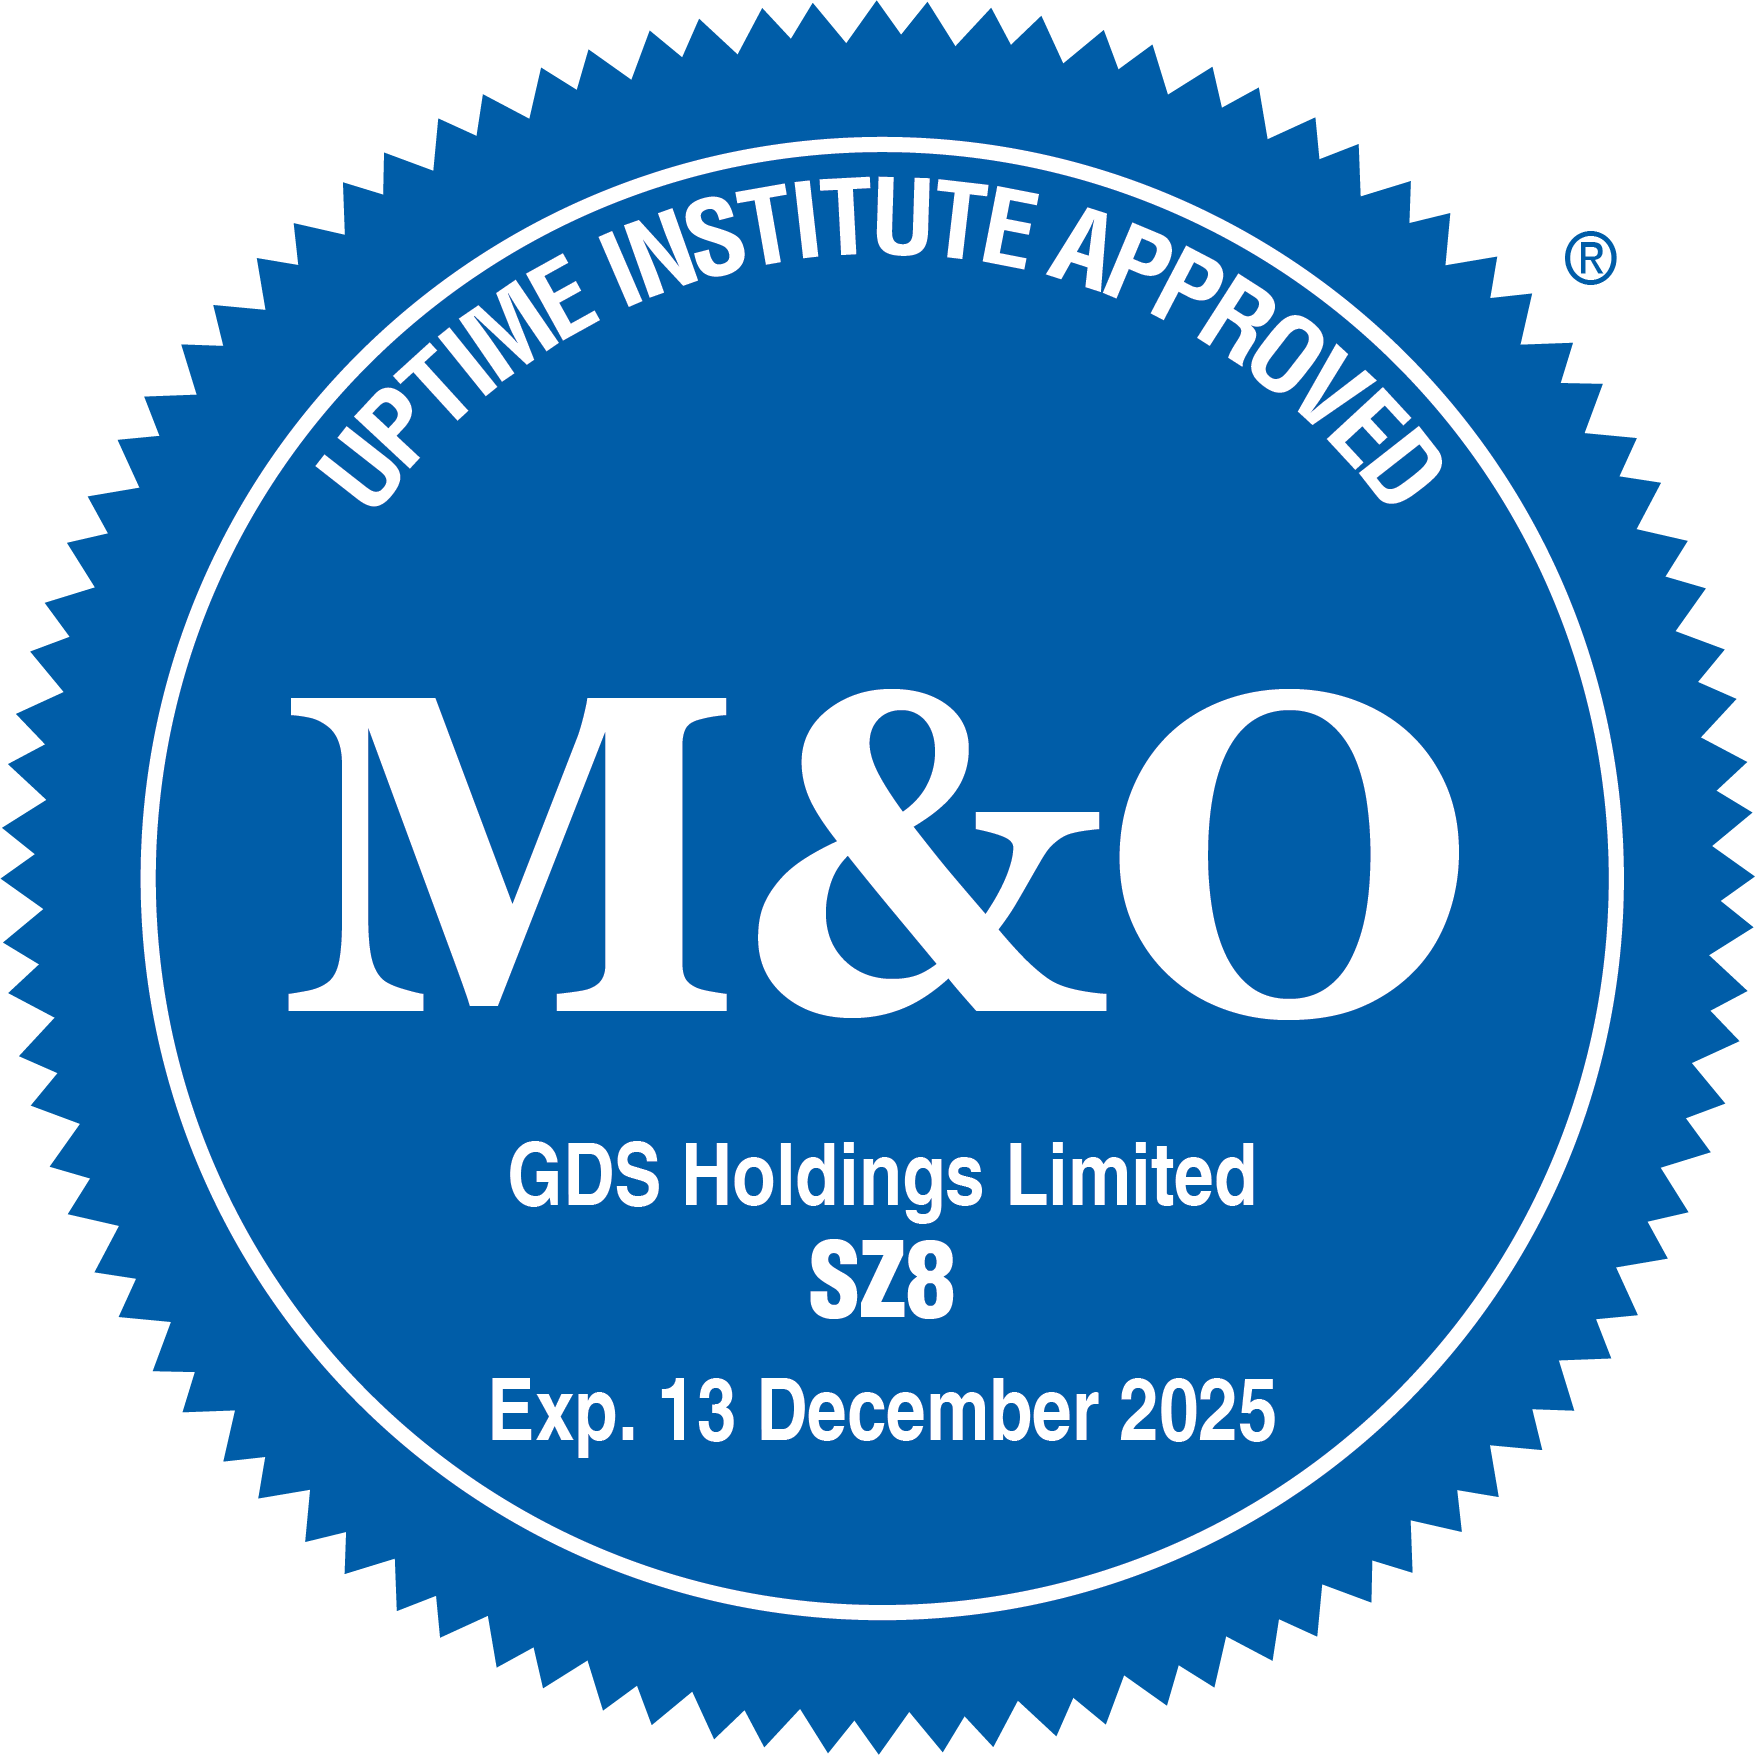 Uptime Institute on X: Uptime extends its congratulations to  @GDSHoldingsLtd for earning the Management & Operations (M&O) Stamp of  Approval for their SZ8 data center. The M&O award recognizes data center  teams